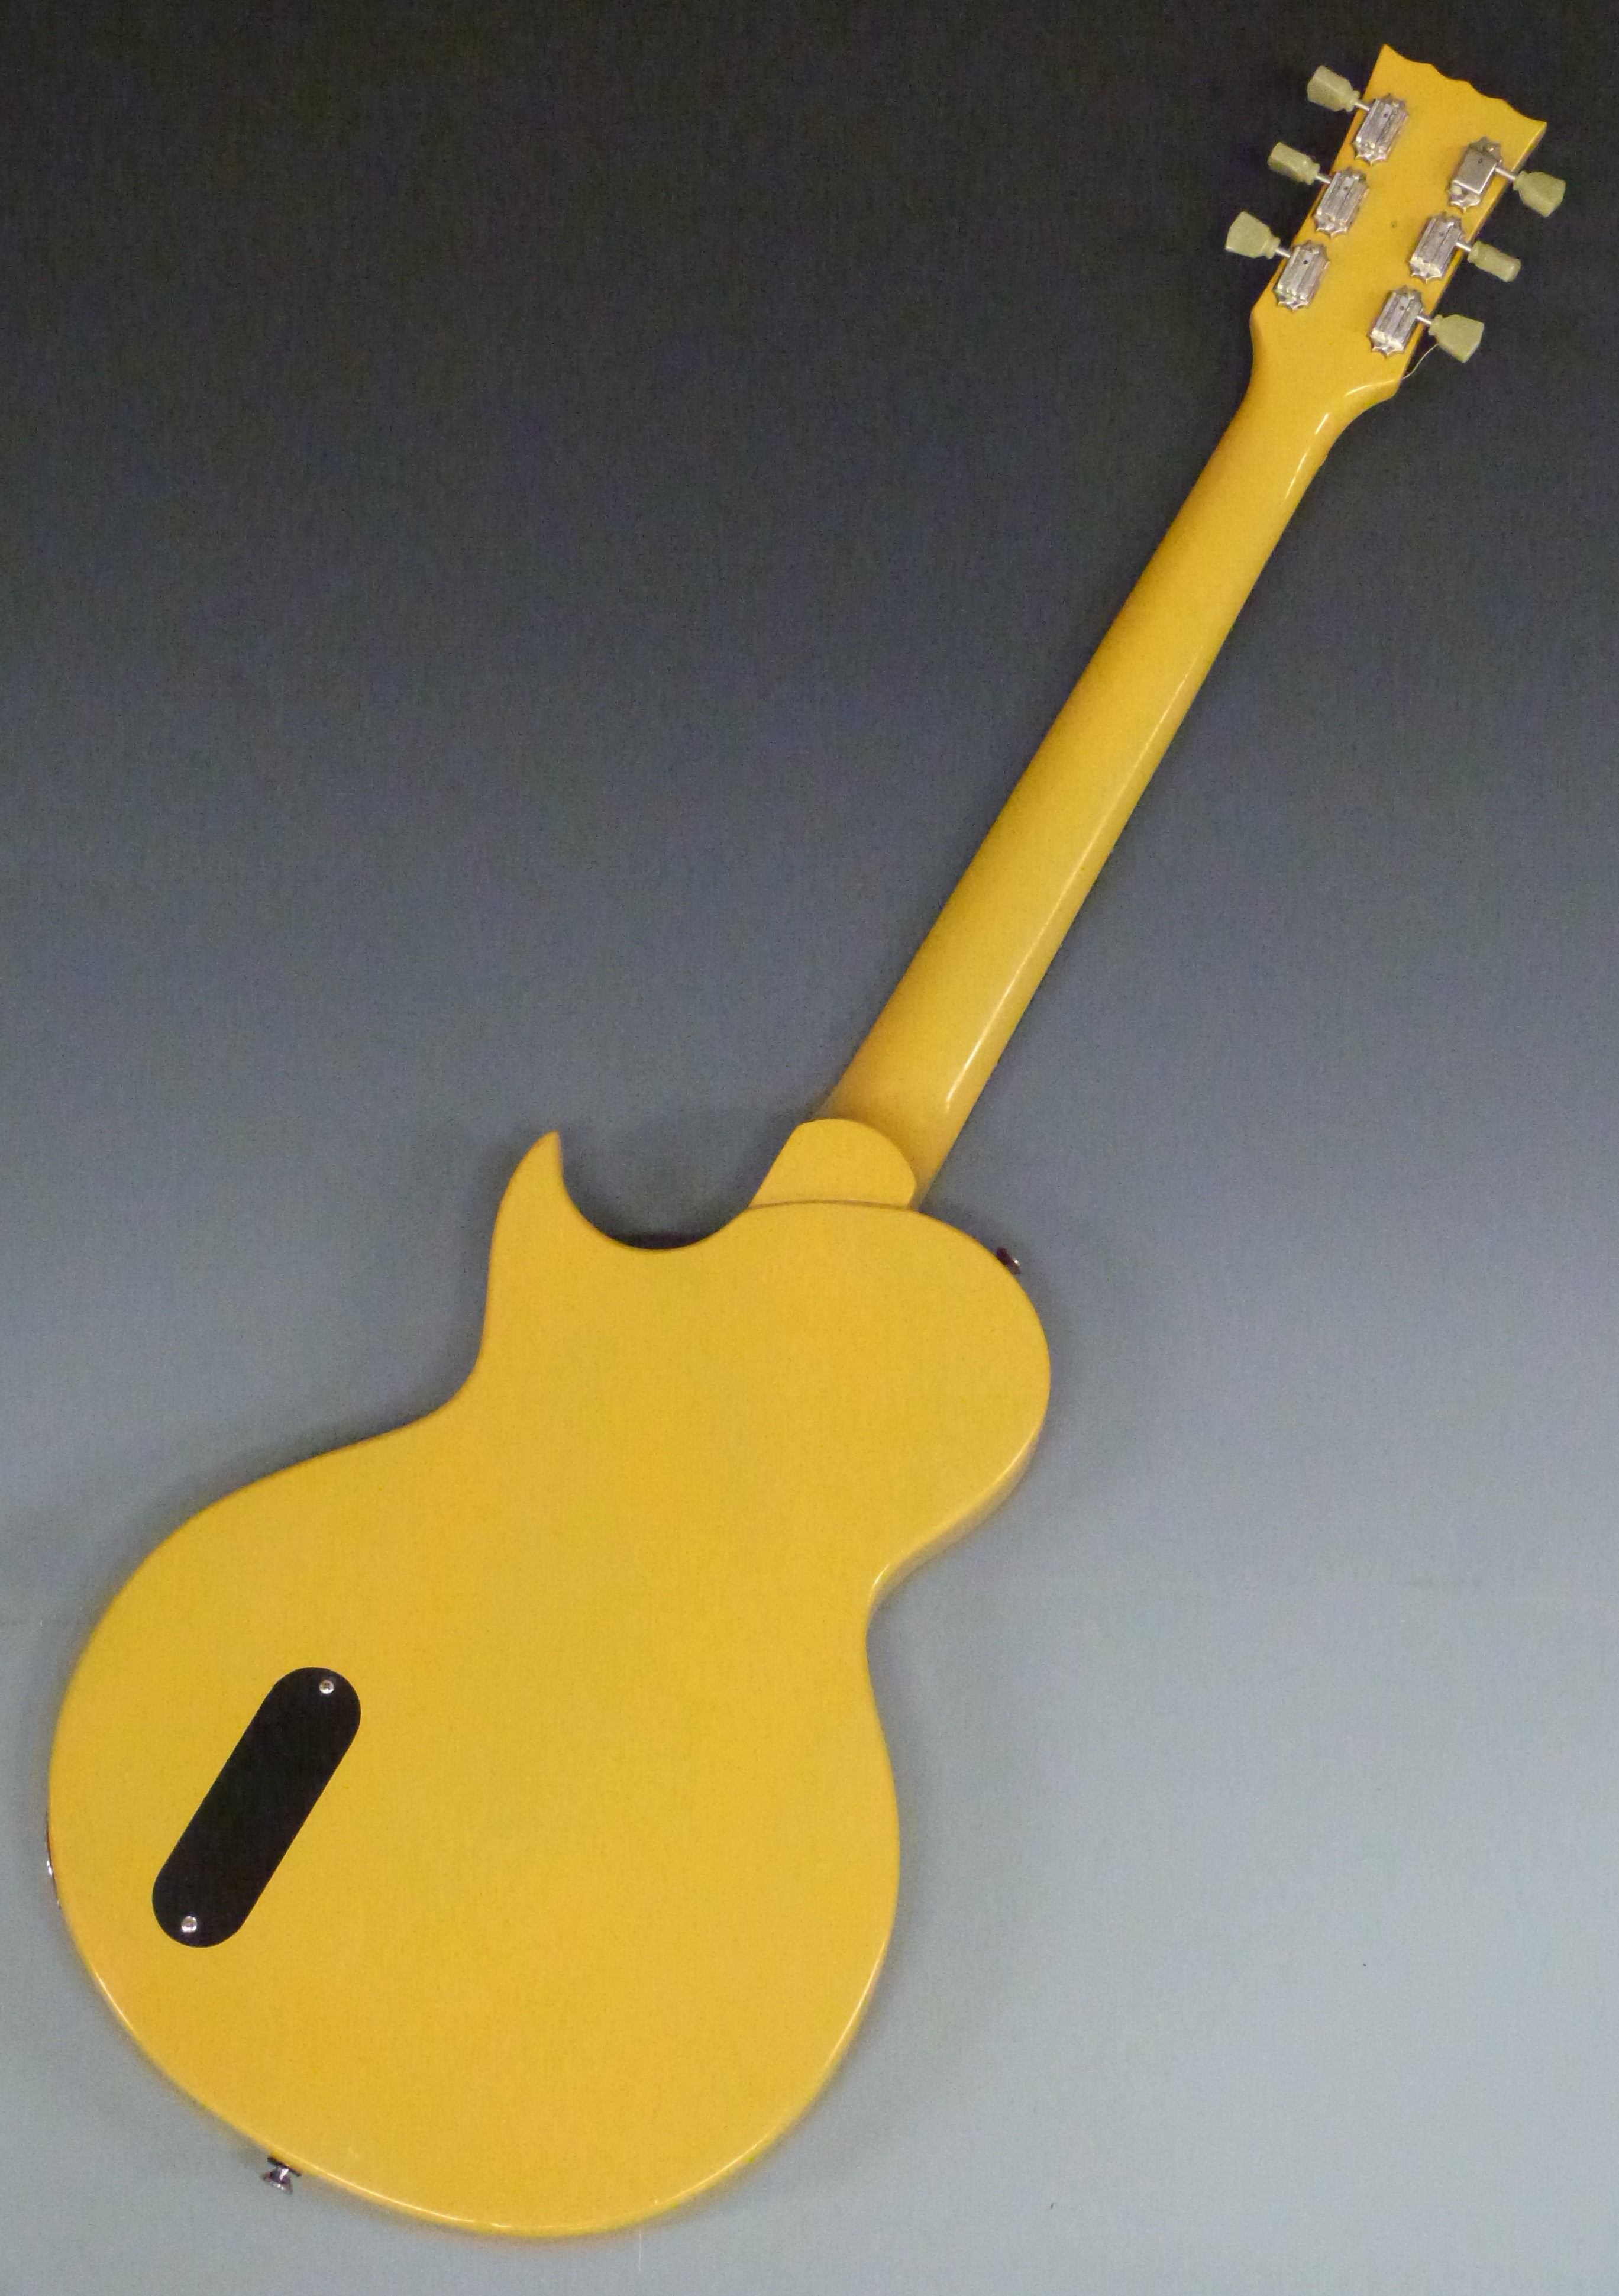 Electric guitar in yellow lacquered finish by Vintage, Wilkinson pick-up - Image 5 of 6